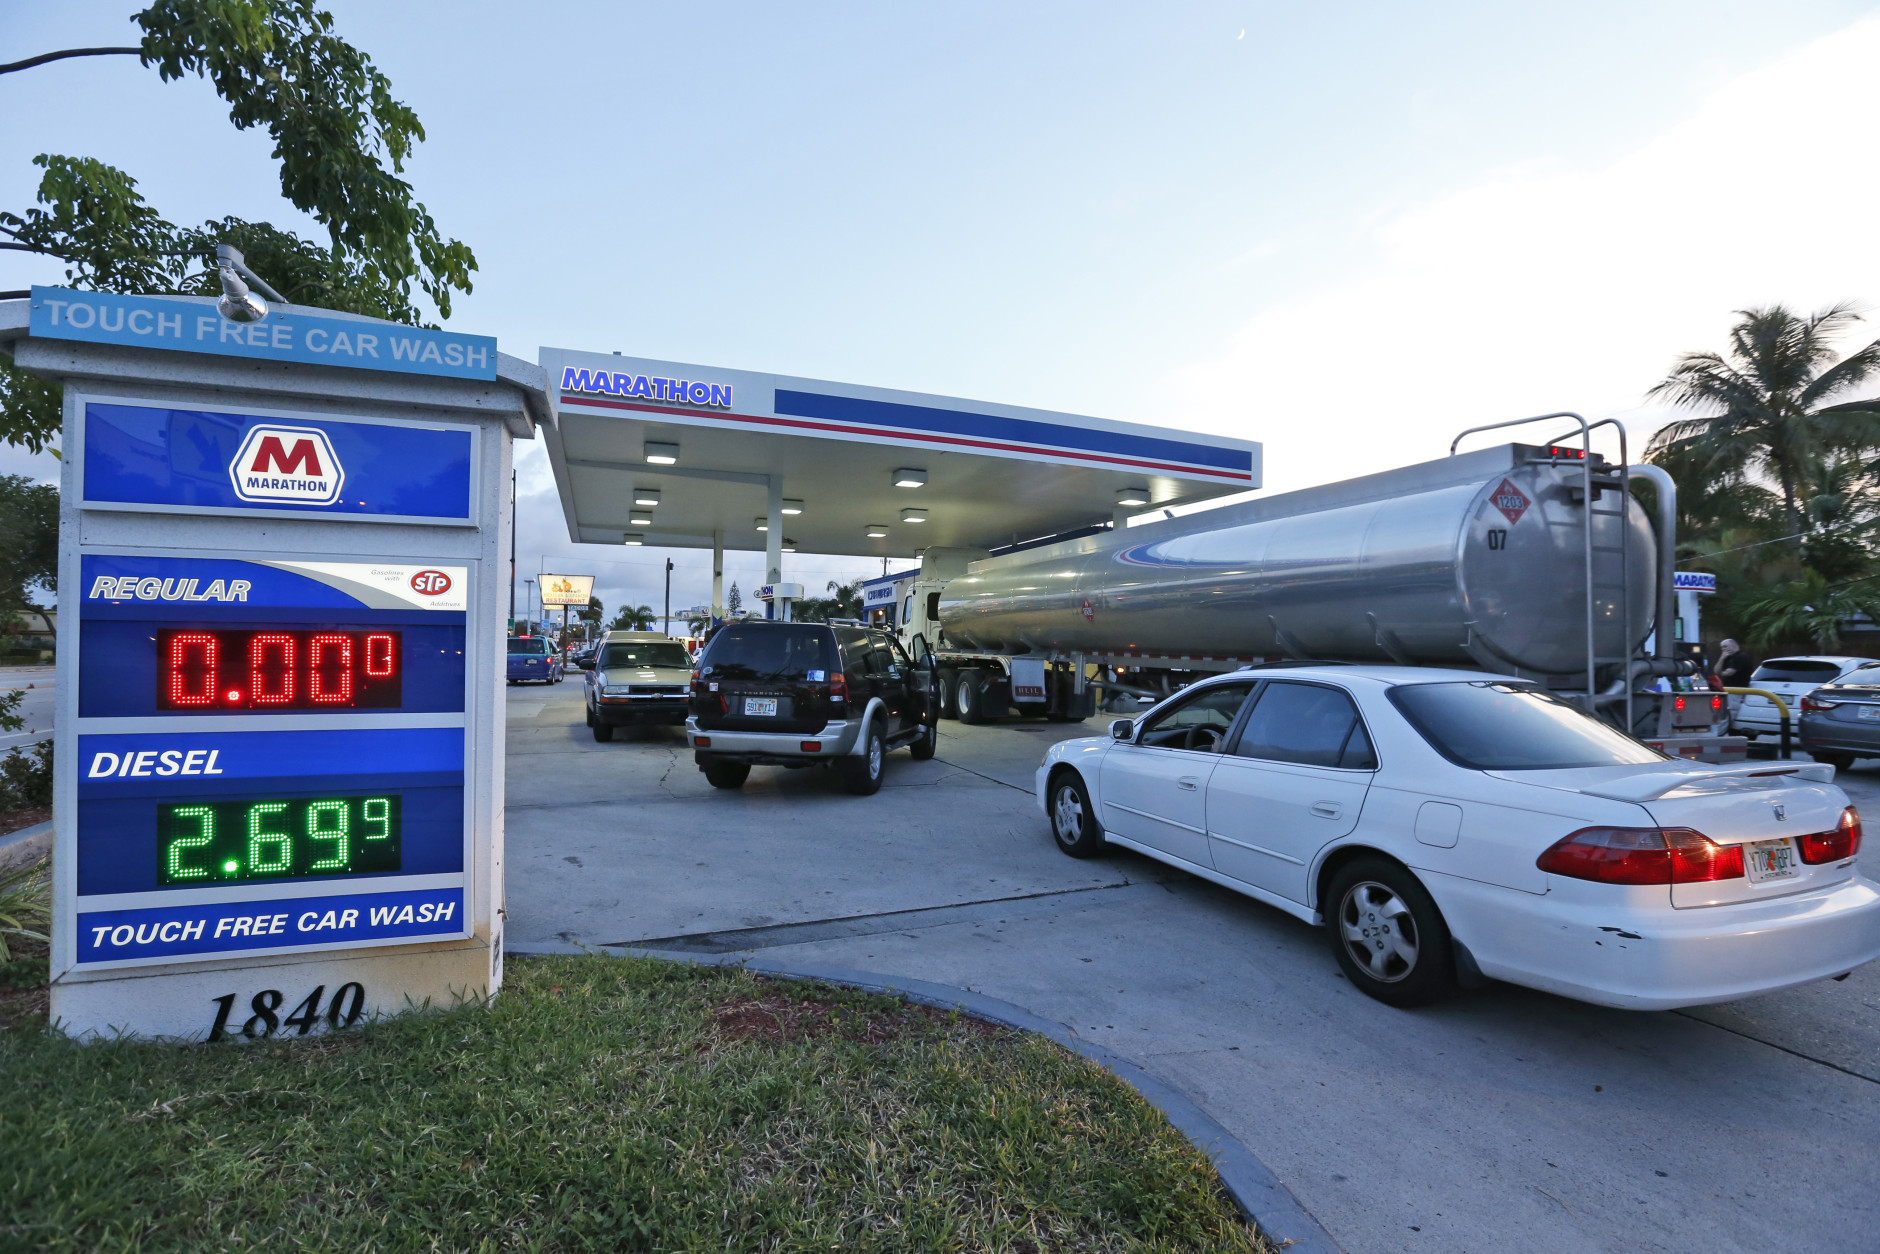 Drivers wait as a truck fills the empty tanks of a Marathon gasoline station, Wednesday, Oct. 5, 2016, in Hollywood, Fla. Hurricane Matthew marched toward Florida, Georgia and the Carolinas and nearly 2 million people along the coast were urged to evacuate their homes Wednesday, a mass exodus ahead of a major storm packing power the U.S. hasn't seen in more than a decade. (AP Photo/Wilfredo Lee)